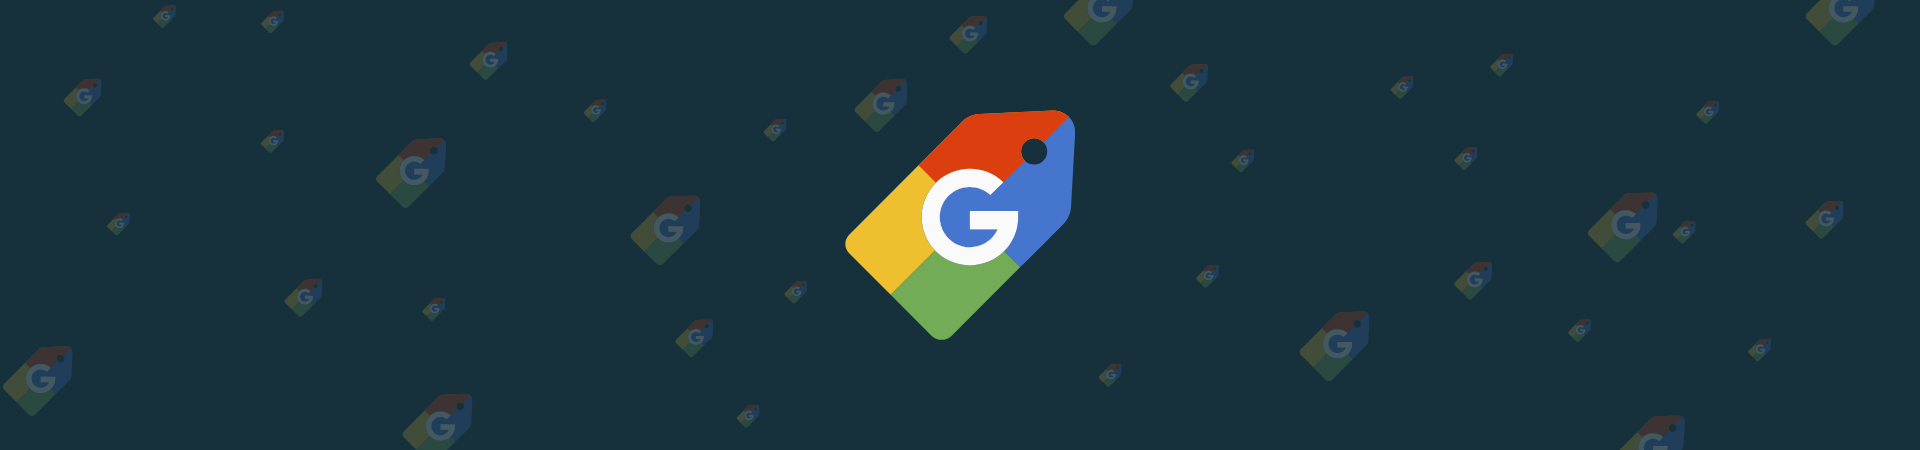 Banner - Google Shopping logo repeated